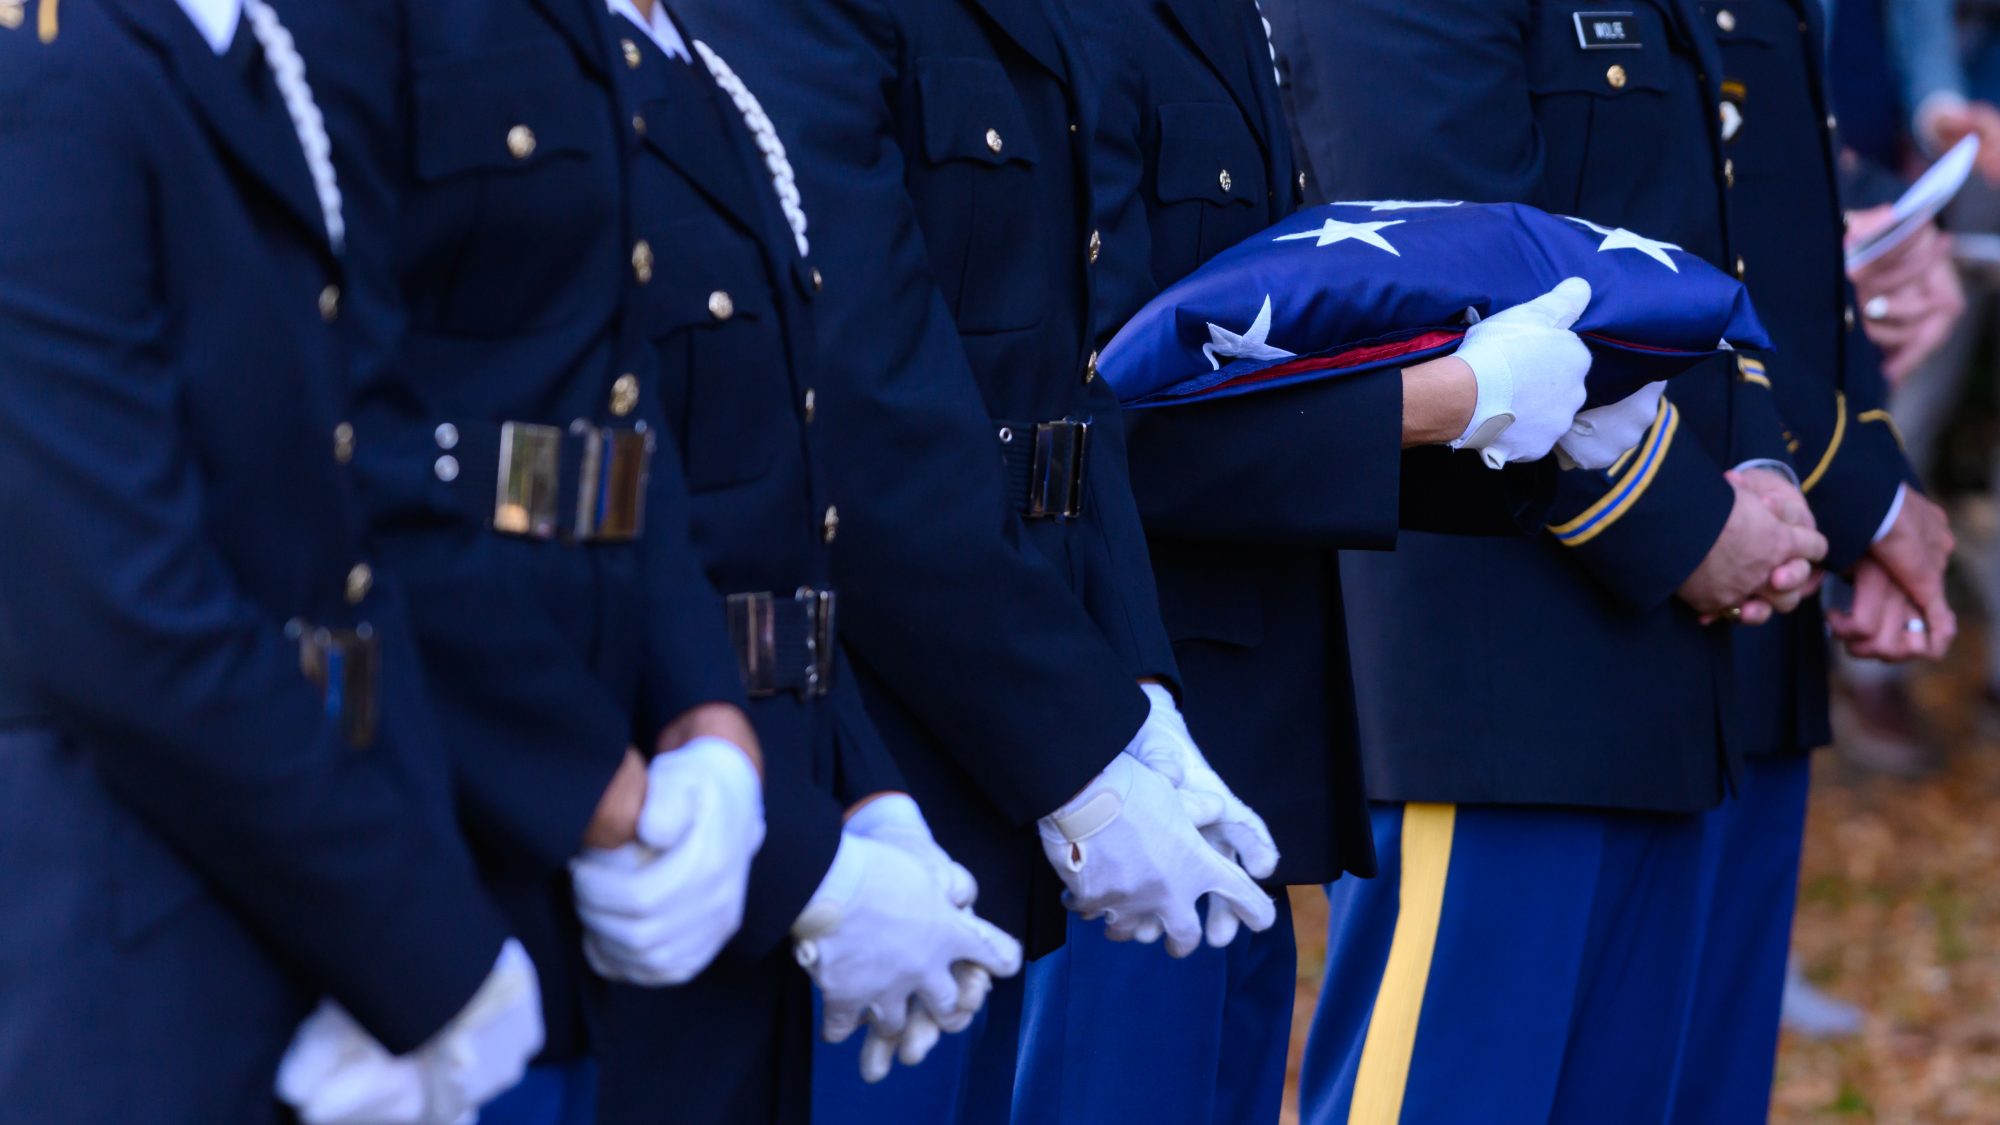 Service members holding folded American flag